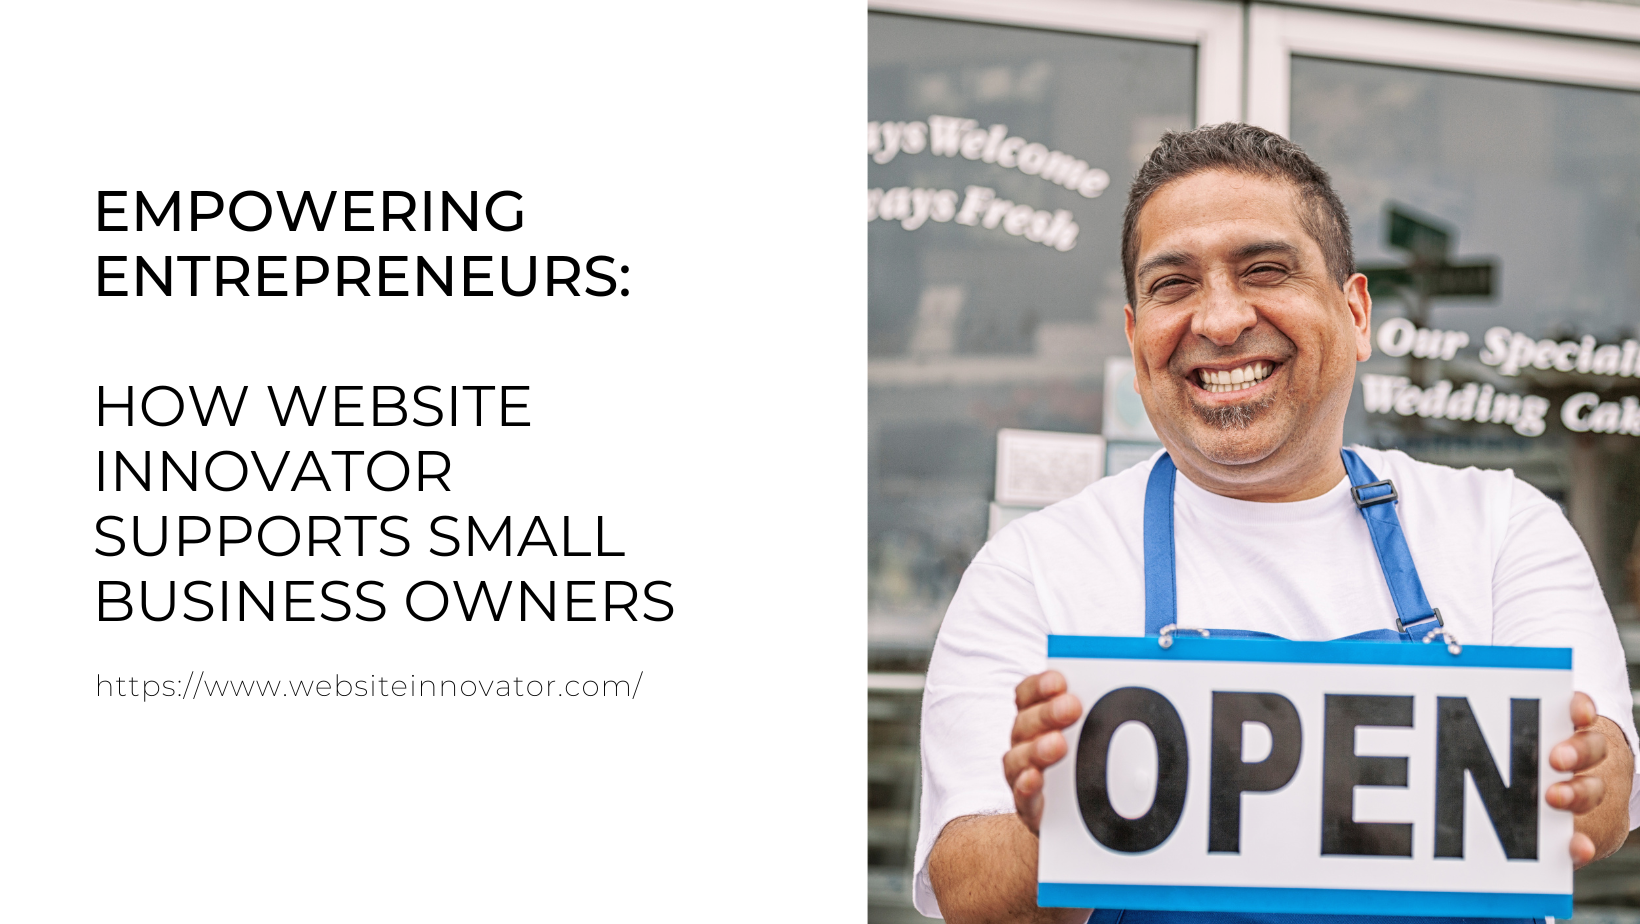 Empowering Entrepreneurs: How Website Innovator Supports Small Business Owners